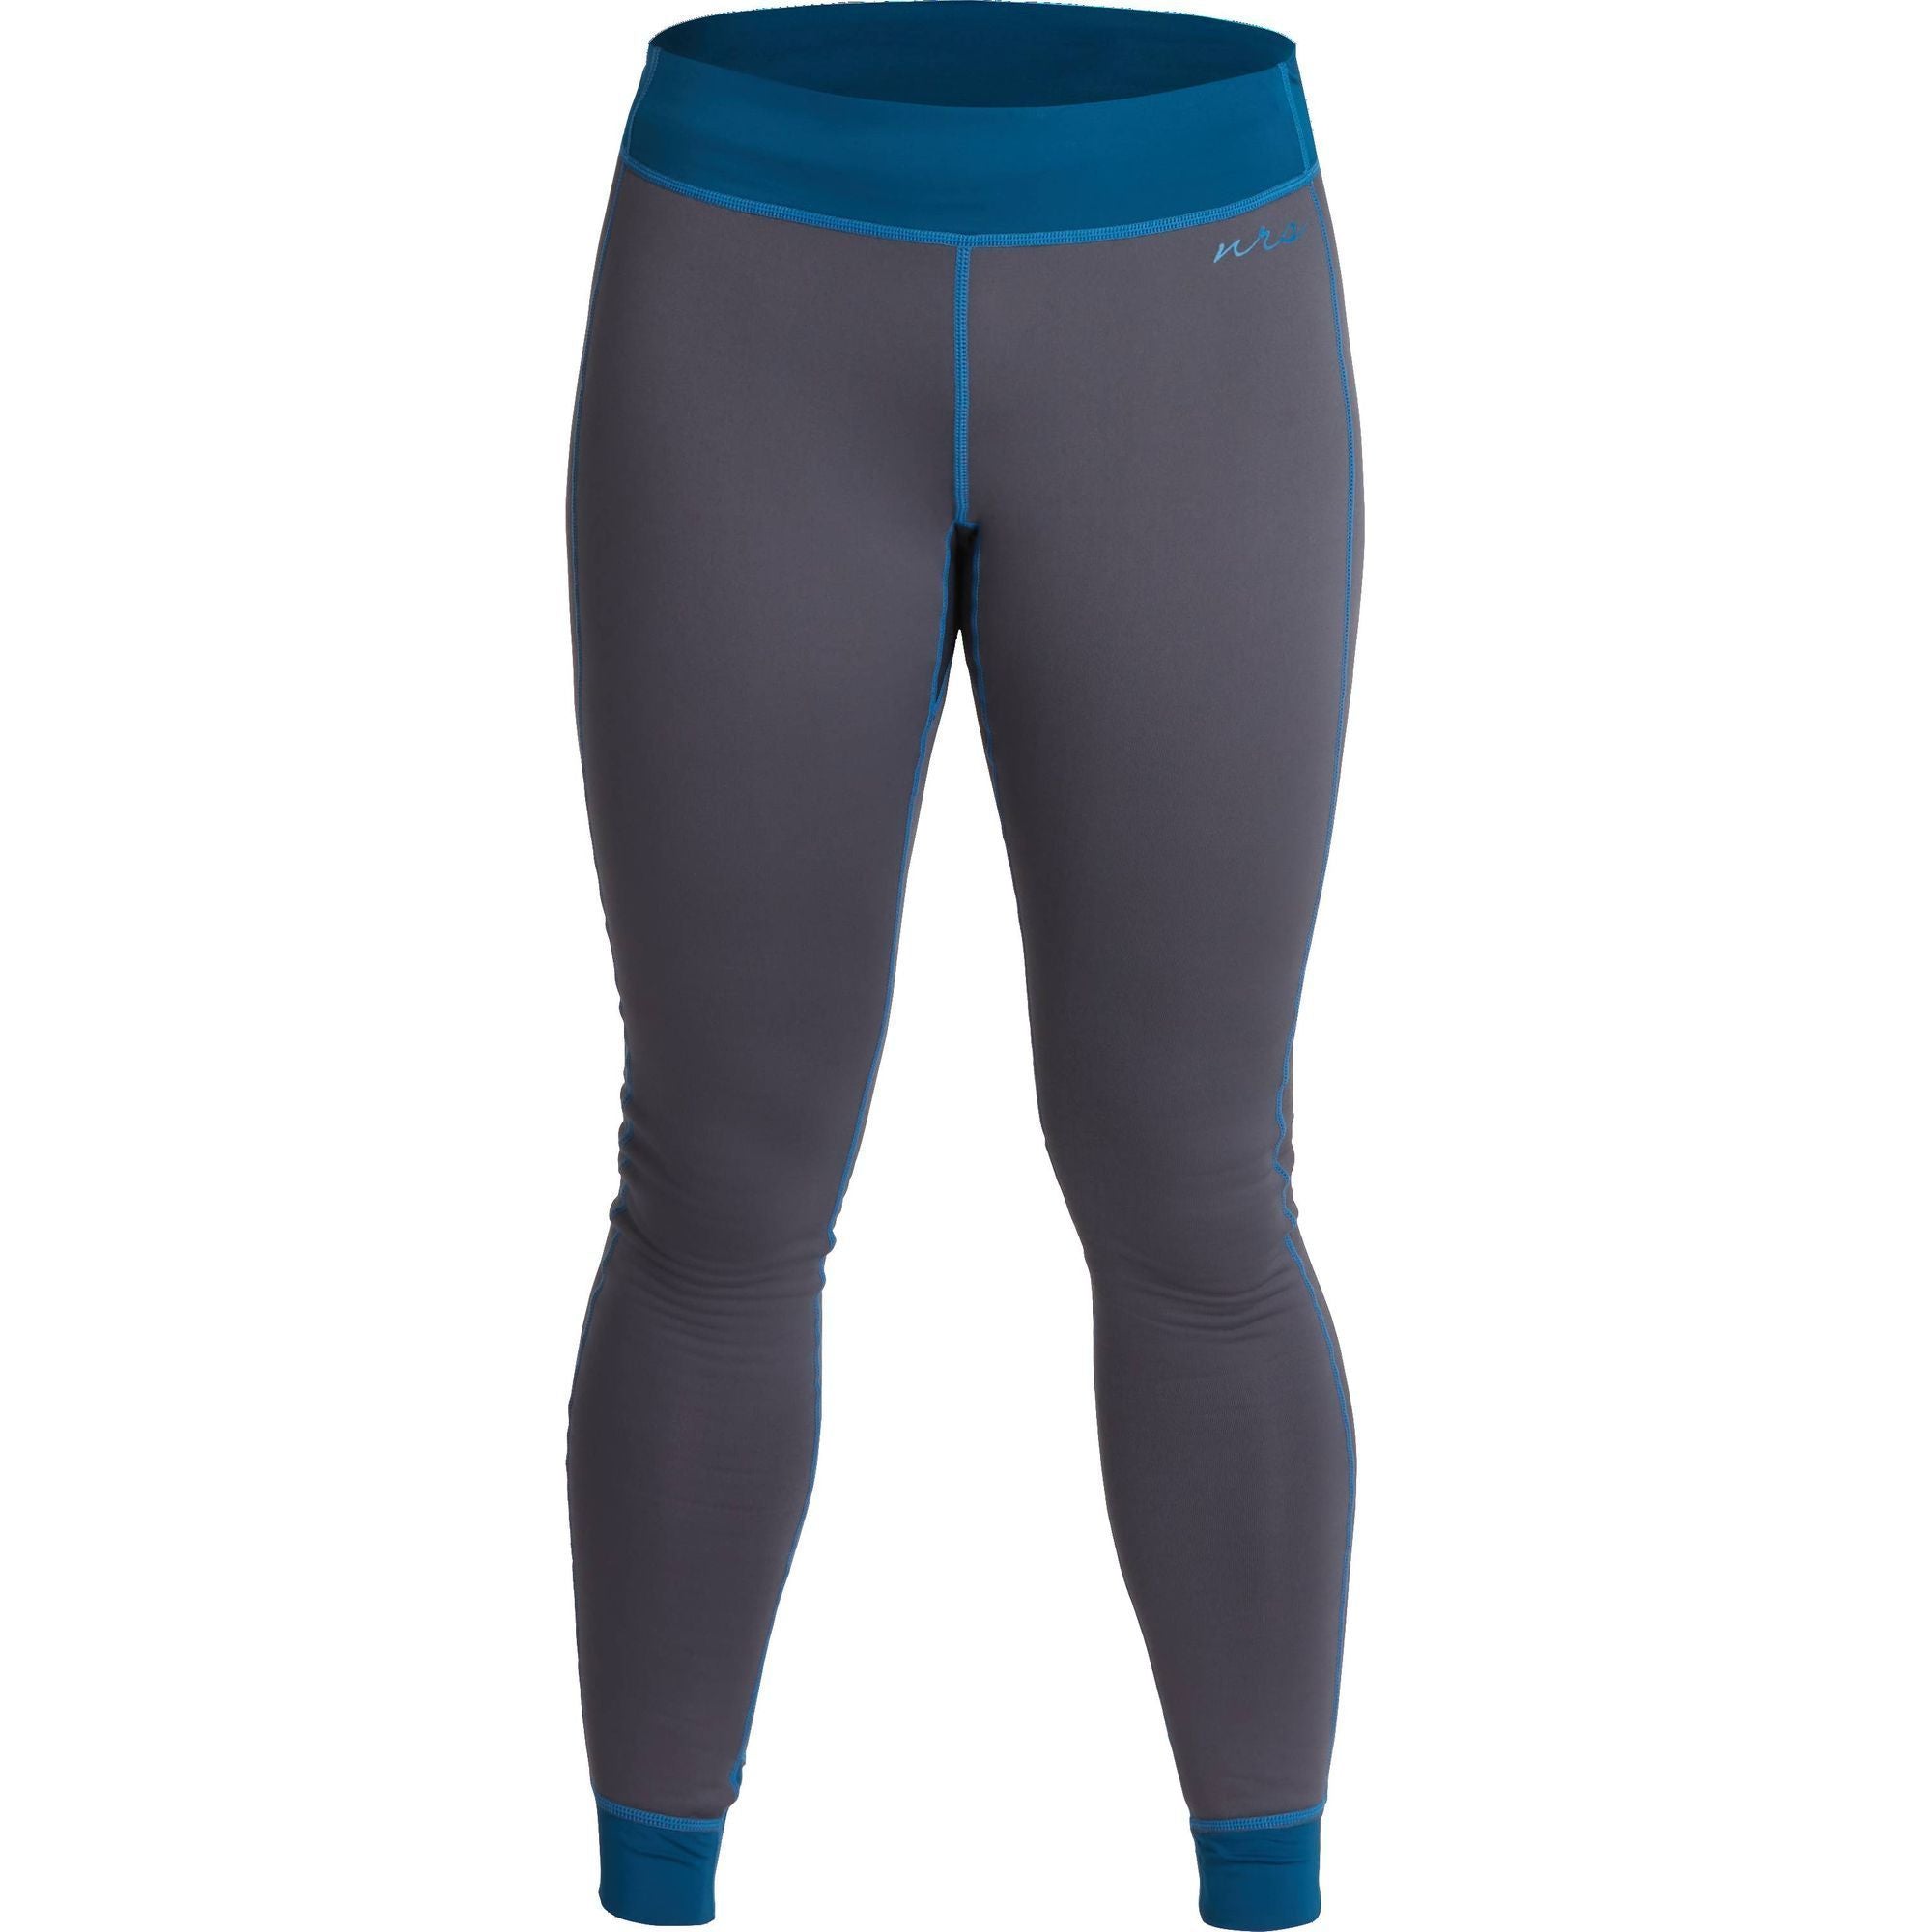 NRS Expedition Weight Union Pants, Women's